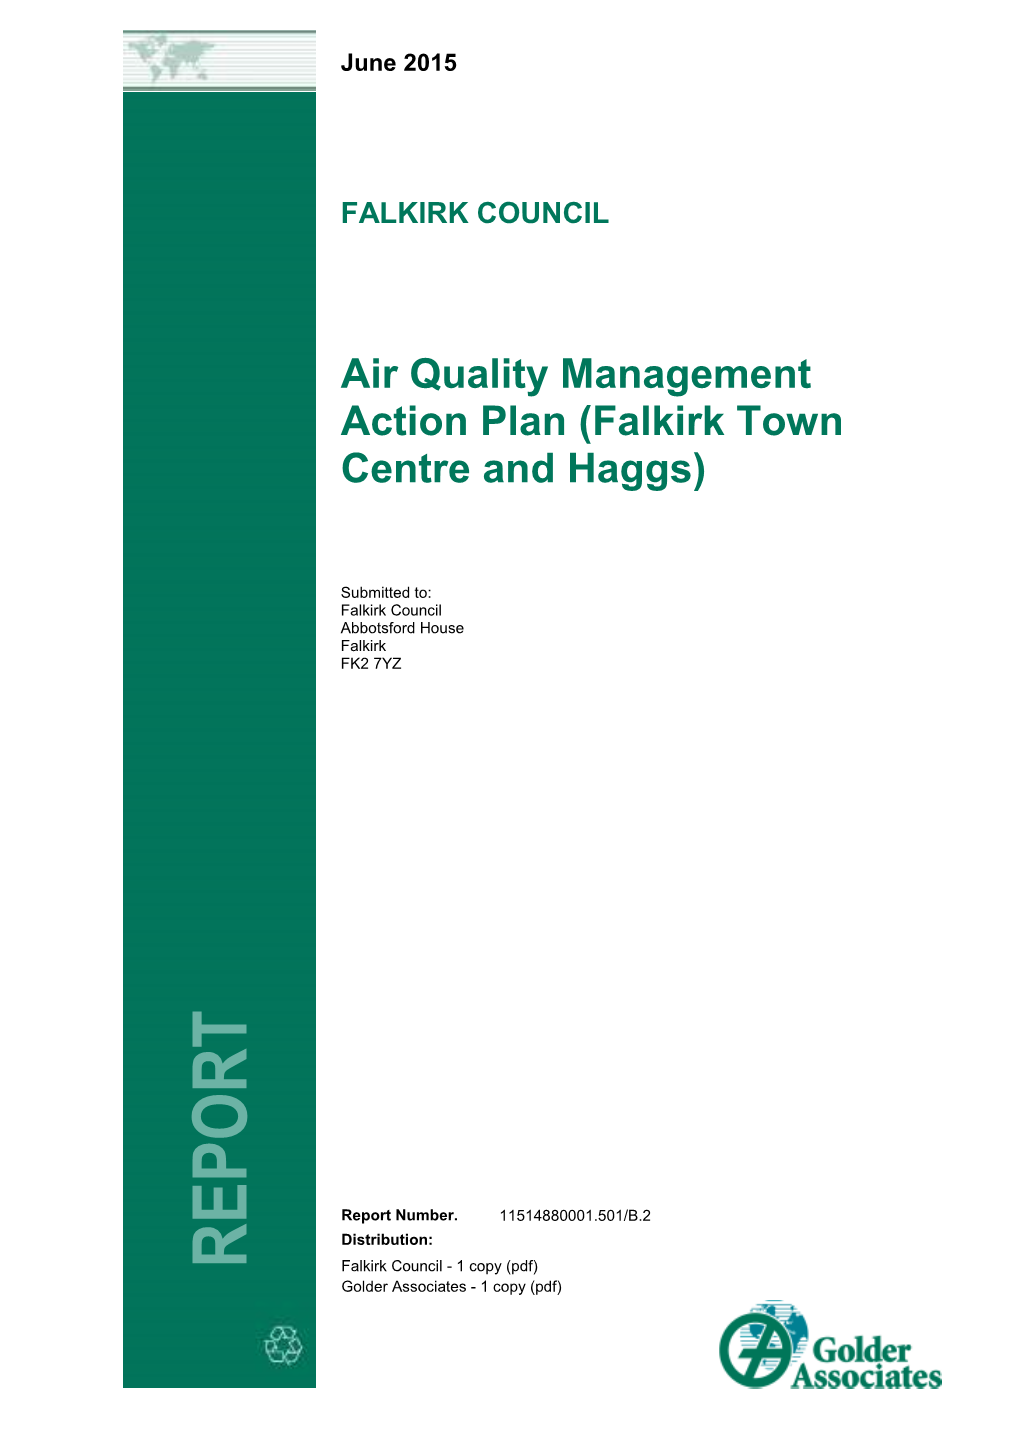 2015 Falkirk and Haggs Air Quality Action Plan